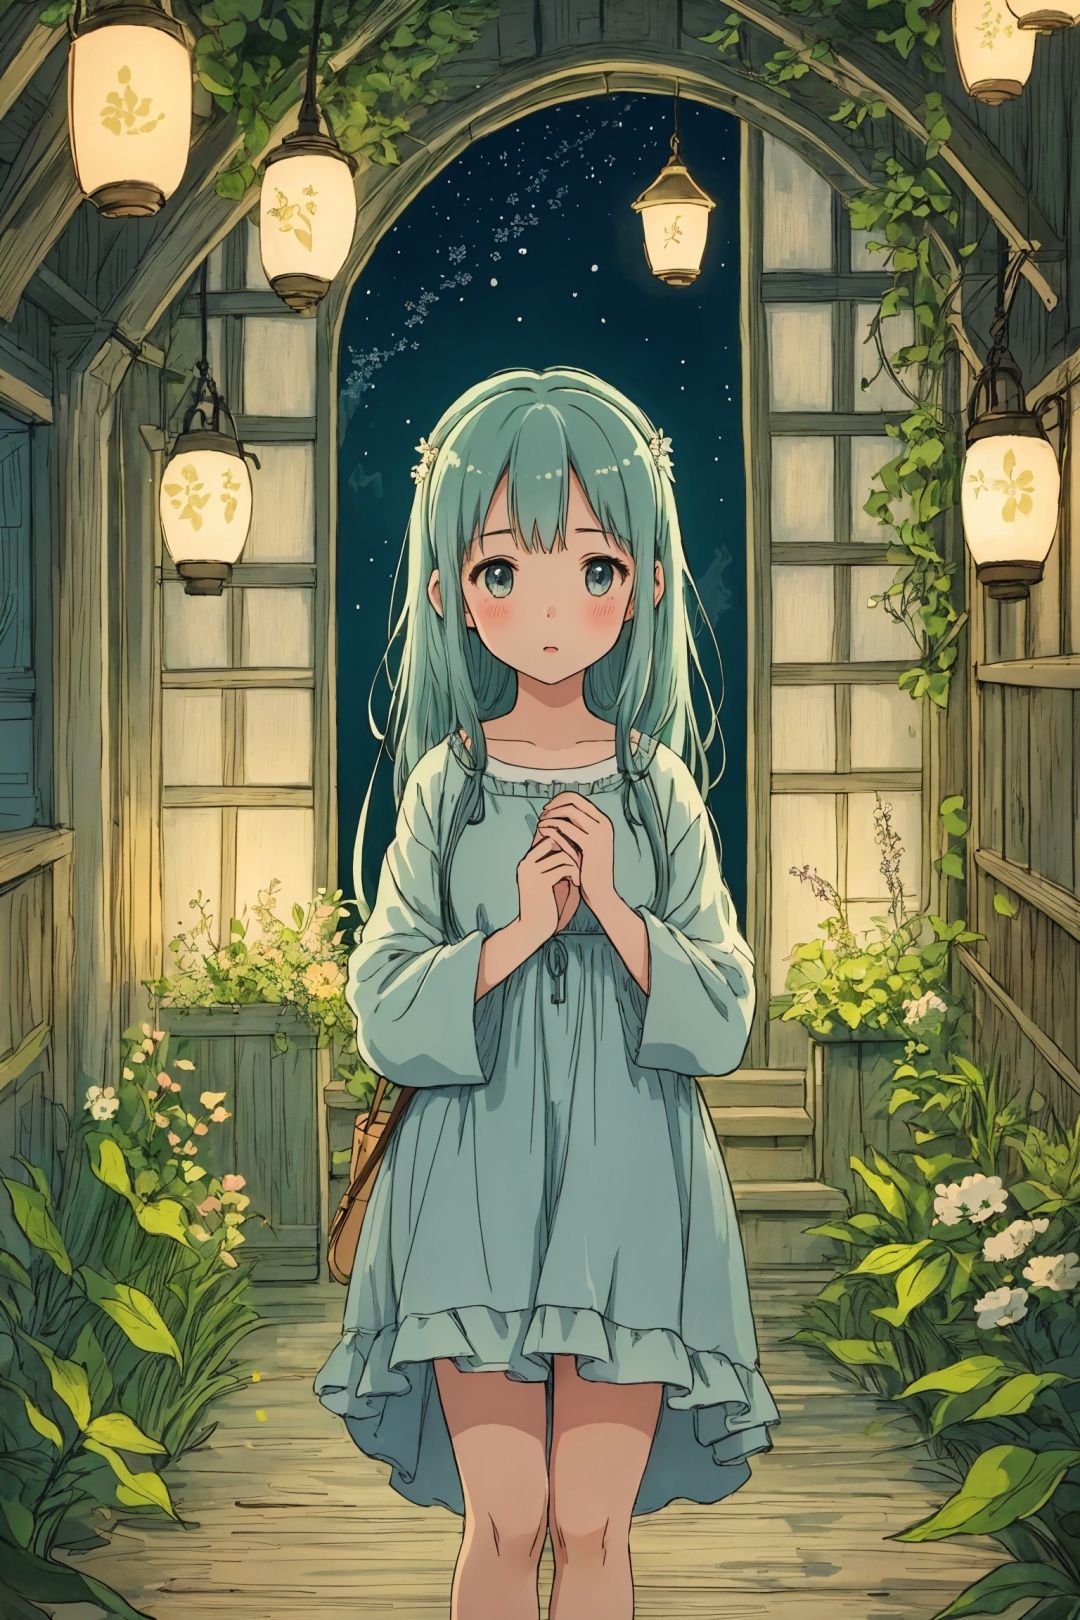  
A girl wearing a charming cat-themed onesie pajama in the style reminiscent of Studio Ghibli. The girl exudes a sense of innocence and wonder, with bright and expressive eyes that captivate the viewer. Her sleepwear is beautifully illustrated with intricate patterns and delicate details, showcasing the attention to aesthetics and craftsmanship characteristic of Ghibli films. The overall composition of the scene reflects the enchanting and whimsical atmosphere commonly found in Studio Ghibli animations. The girl is surrounded by a serene and magical setting, with lush nature elements, softly glowing lanterns, and a gentle breeze that adds movement to her hair and the surrounding scenery. The color palette is rich and vibrant, with a mix of warm and cool tones that create a harmonious and inviting ambiance. (best quality, highres, ultra-detailed:1.2), soft and warm lighting, Ghibli-inspired art style, intricate patterns and details, magical and serene atmosphere, expressive and captivating eyes.

Negative Prompt:
nsfw, (low quality, normal quality, worst quality, jpeg artifacts), cropped, monochrome, lowres, low saturation, (watermark), (white letters), inappropriate poses, excessive fanservice, unnatural proportions, poor character design, harsh lighting, cluttered background, busy patterns, dull color palette.